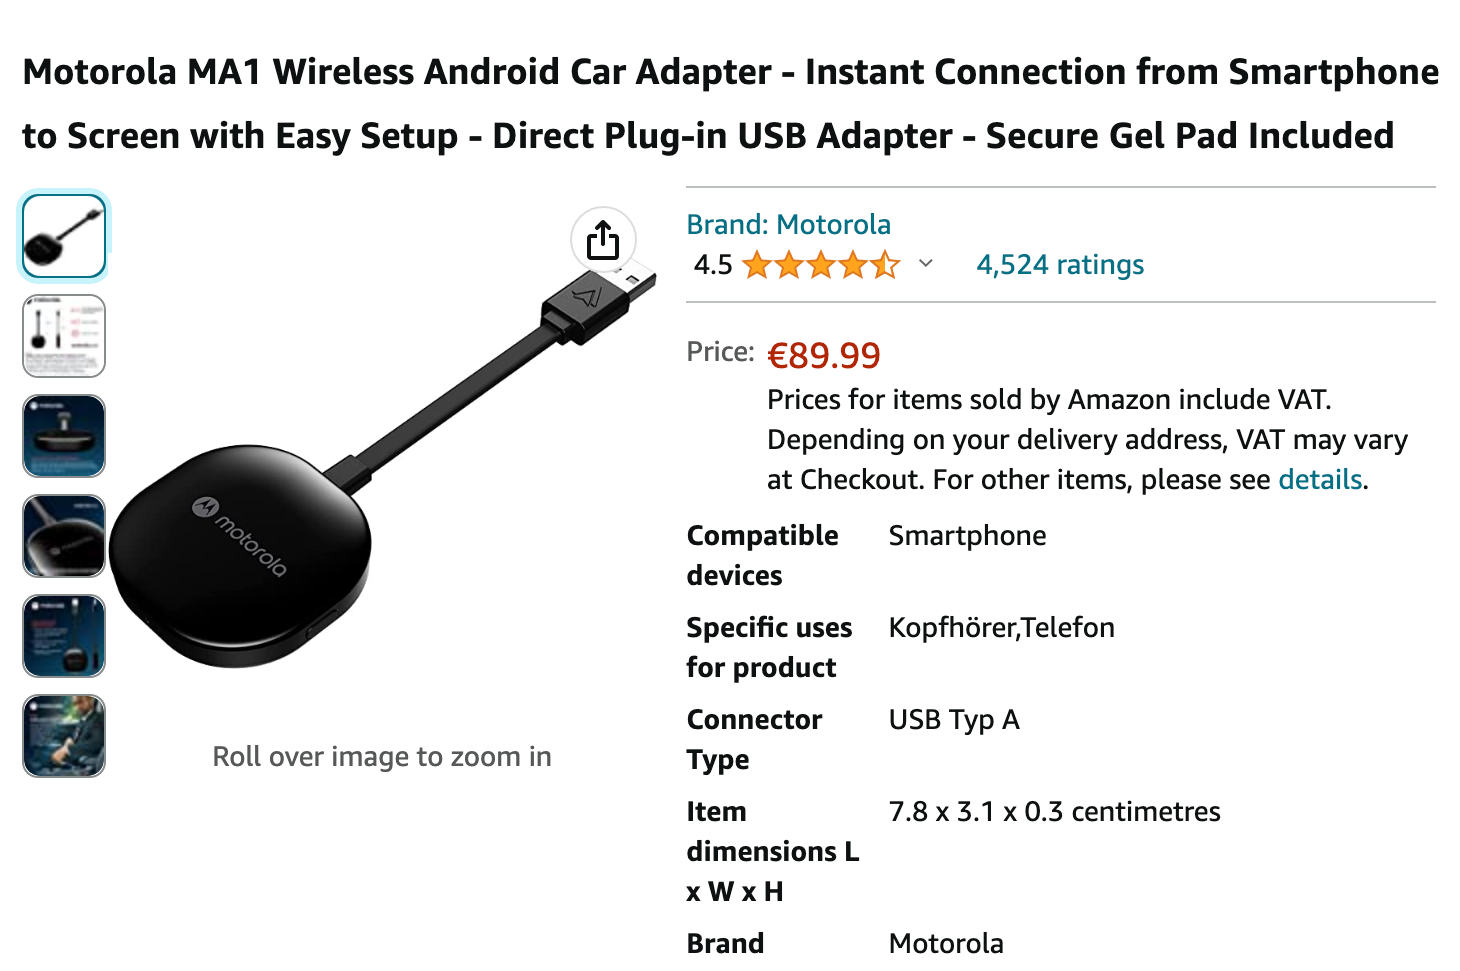 Motorola MA1 adapter brings wireless Android Auto to all cars - 9to5Google